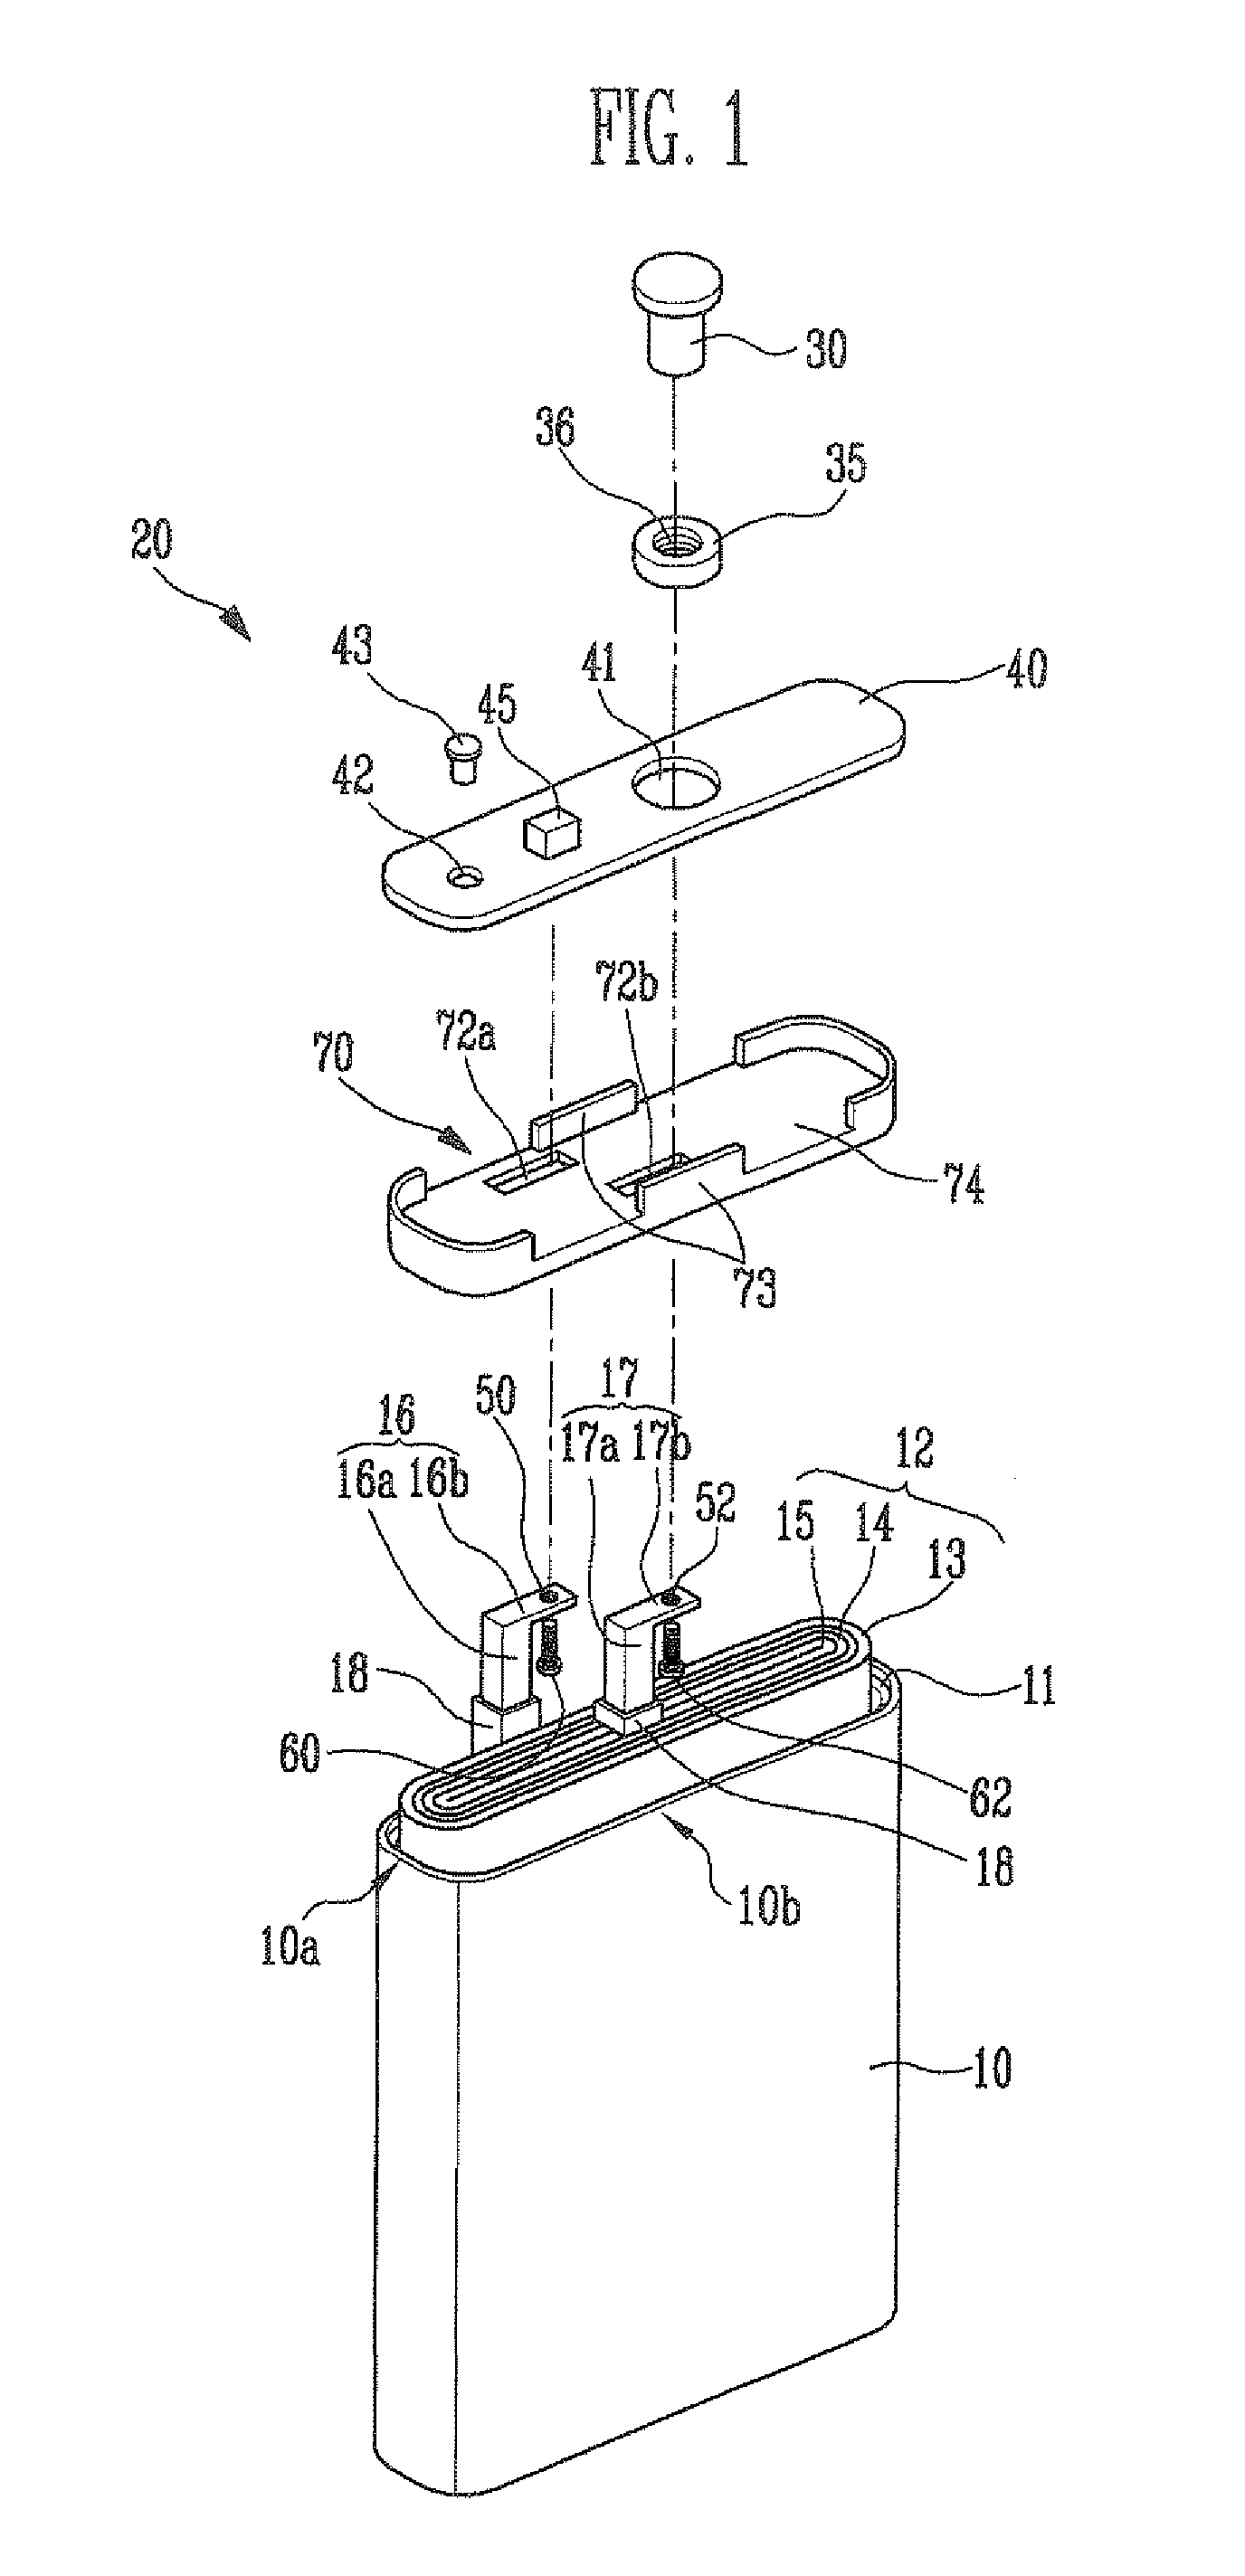 Secondary Battery Having Interconnected Positive and Negative Electrode Tabs